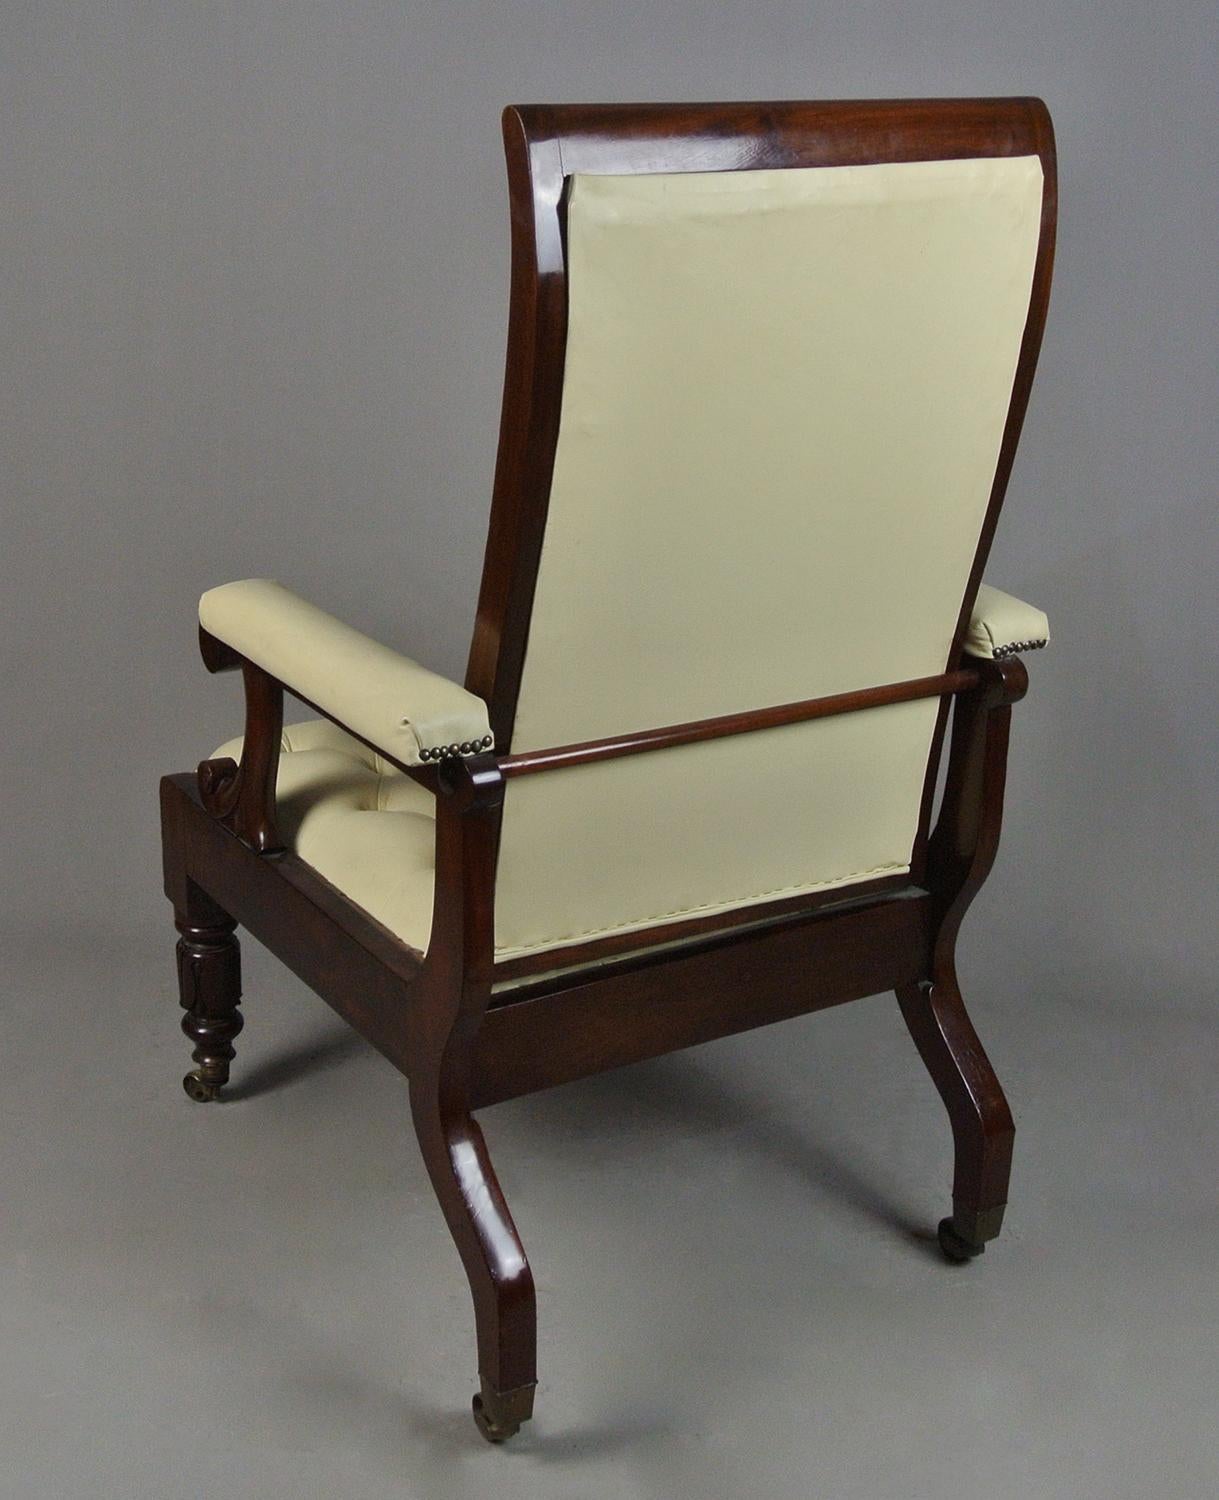 Regency Solid Mahogany ‘Daws Patent’ Reclining Chair c. 1830 For Sale 2